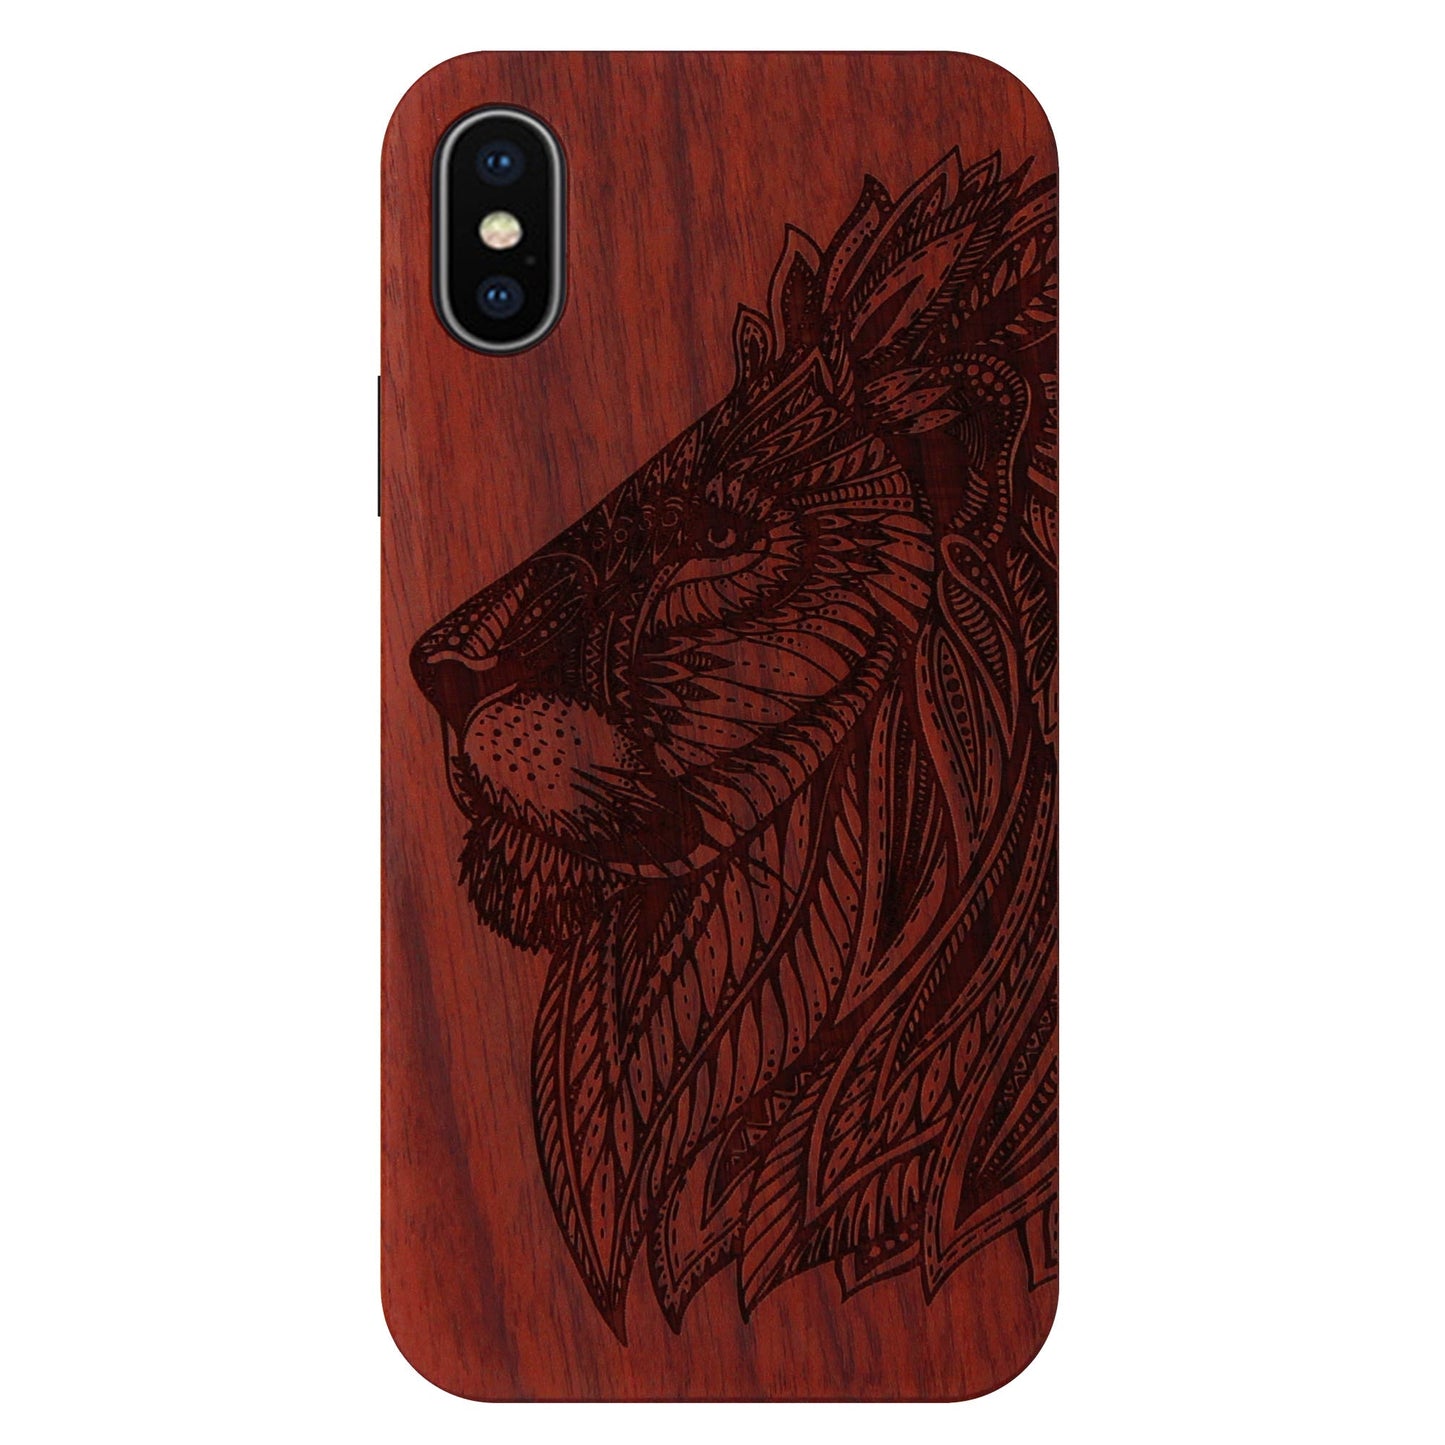 Rosewood Lion Eden Case for iPhone XS Max